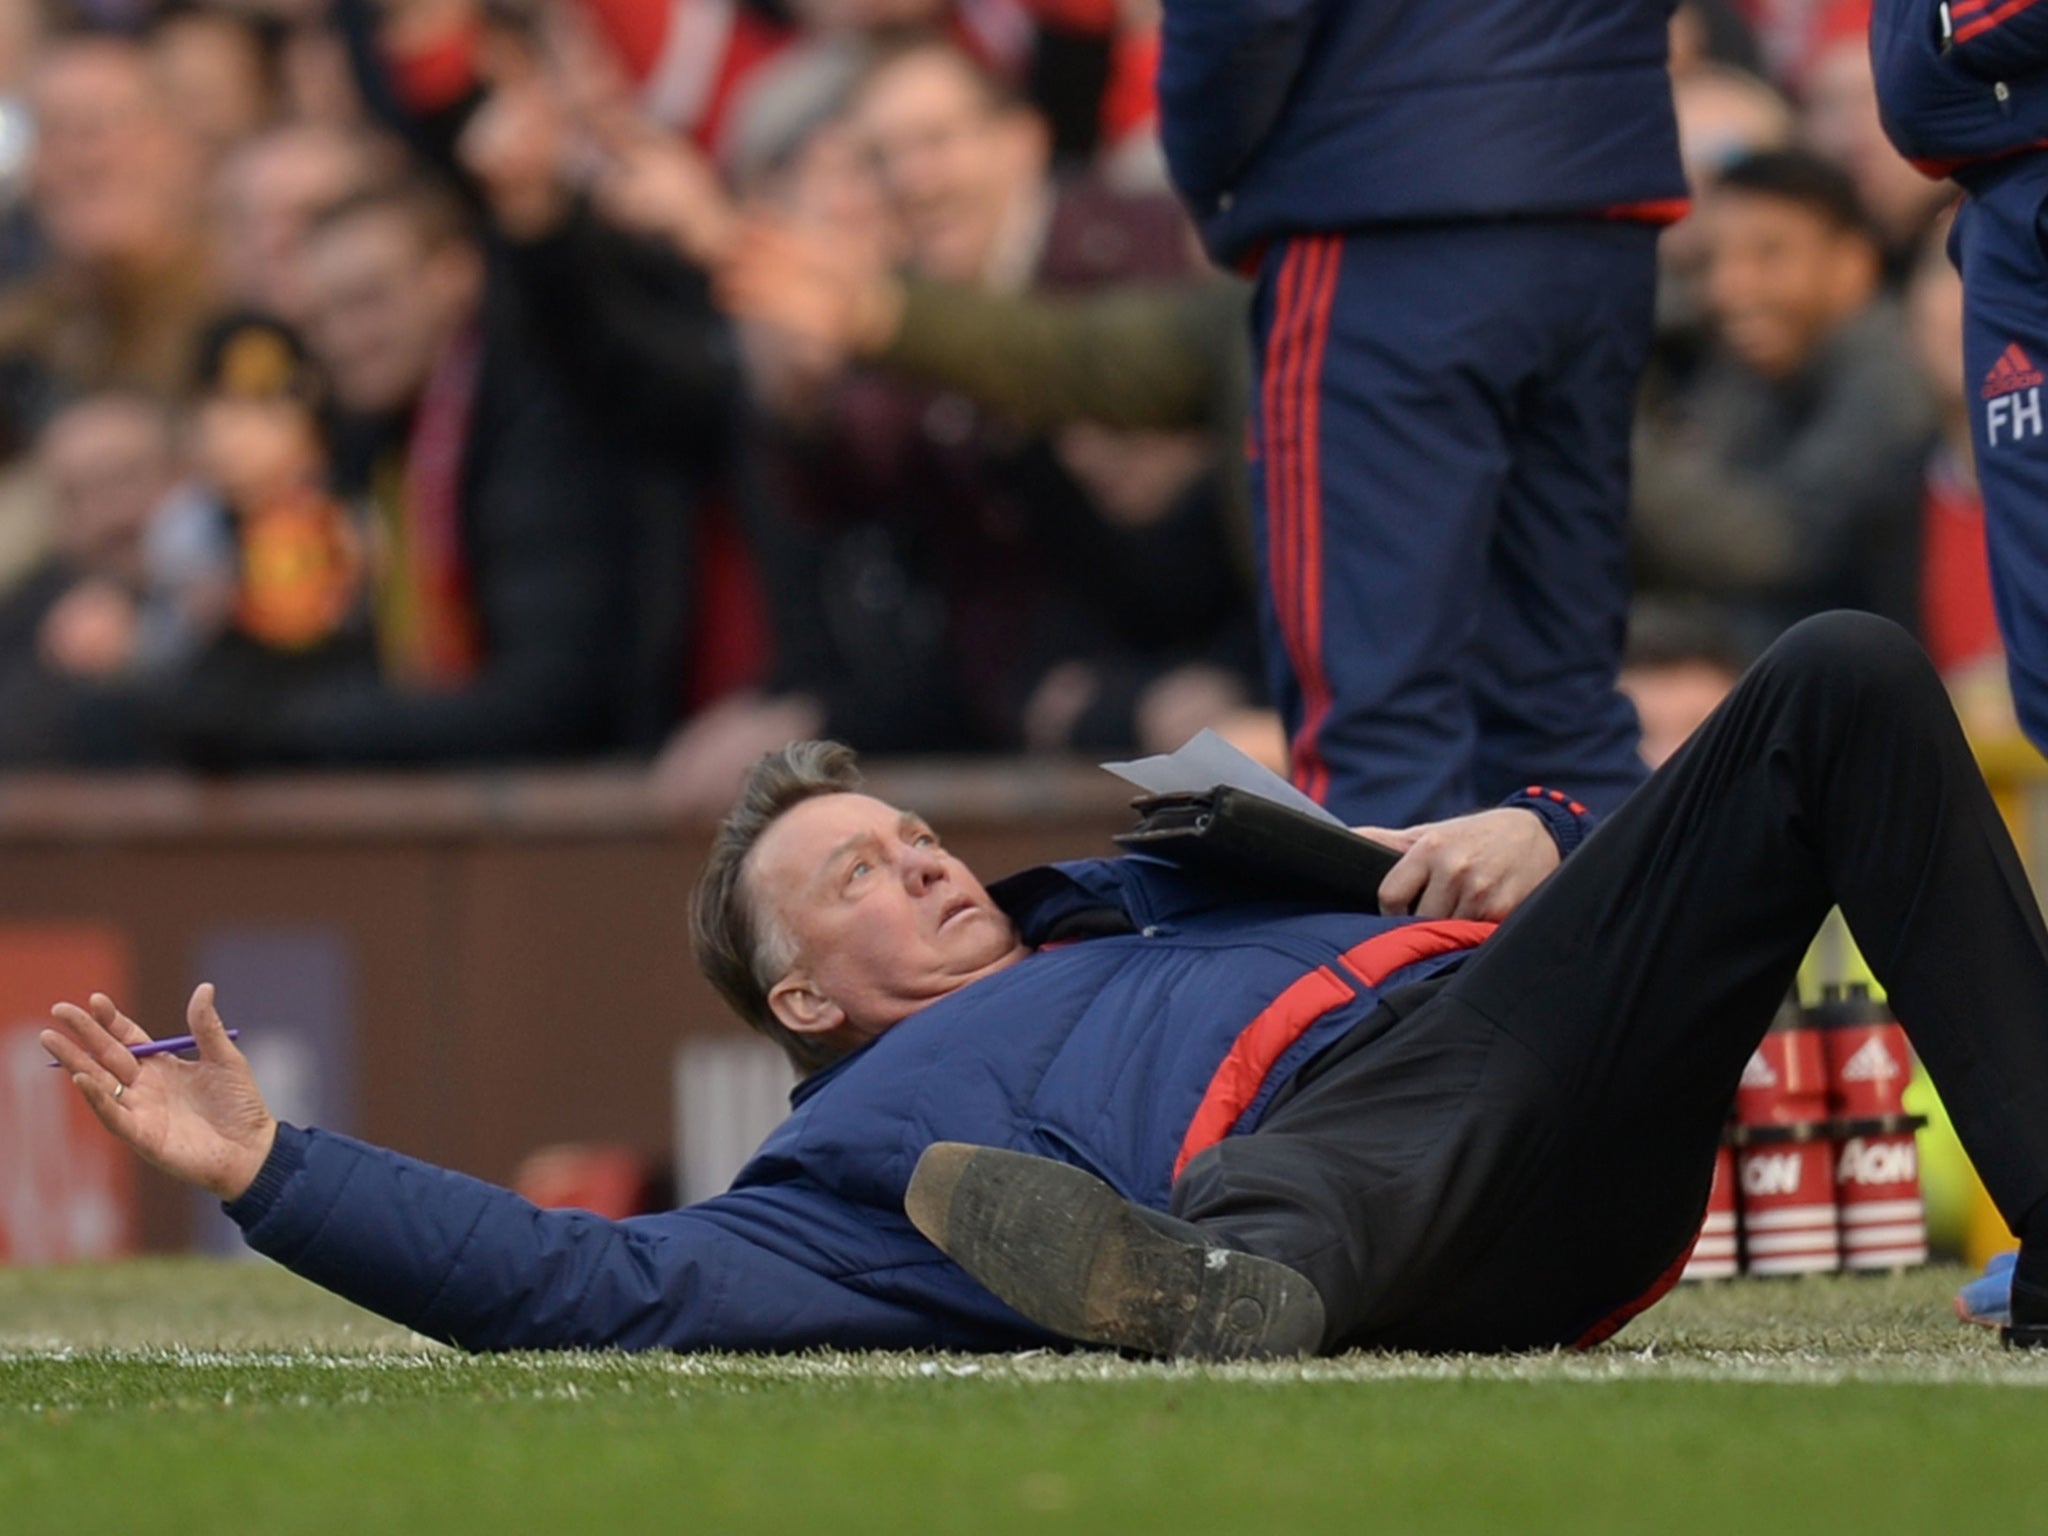 Louis van Gaal dive: Manchester United boss 'falls over' in front of